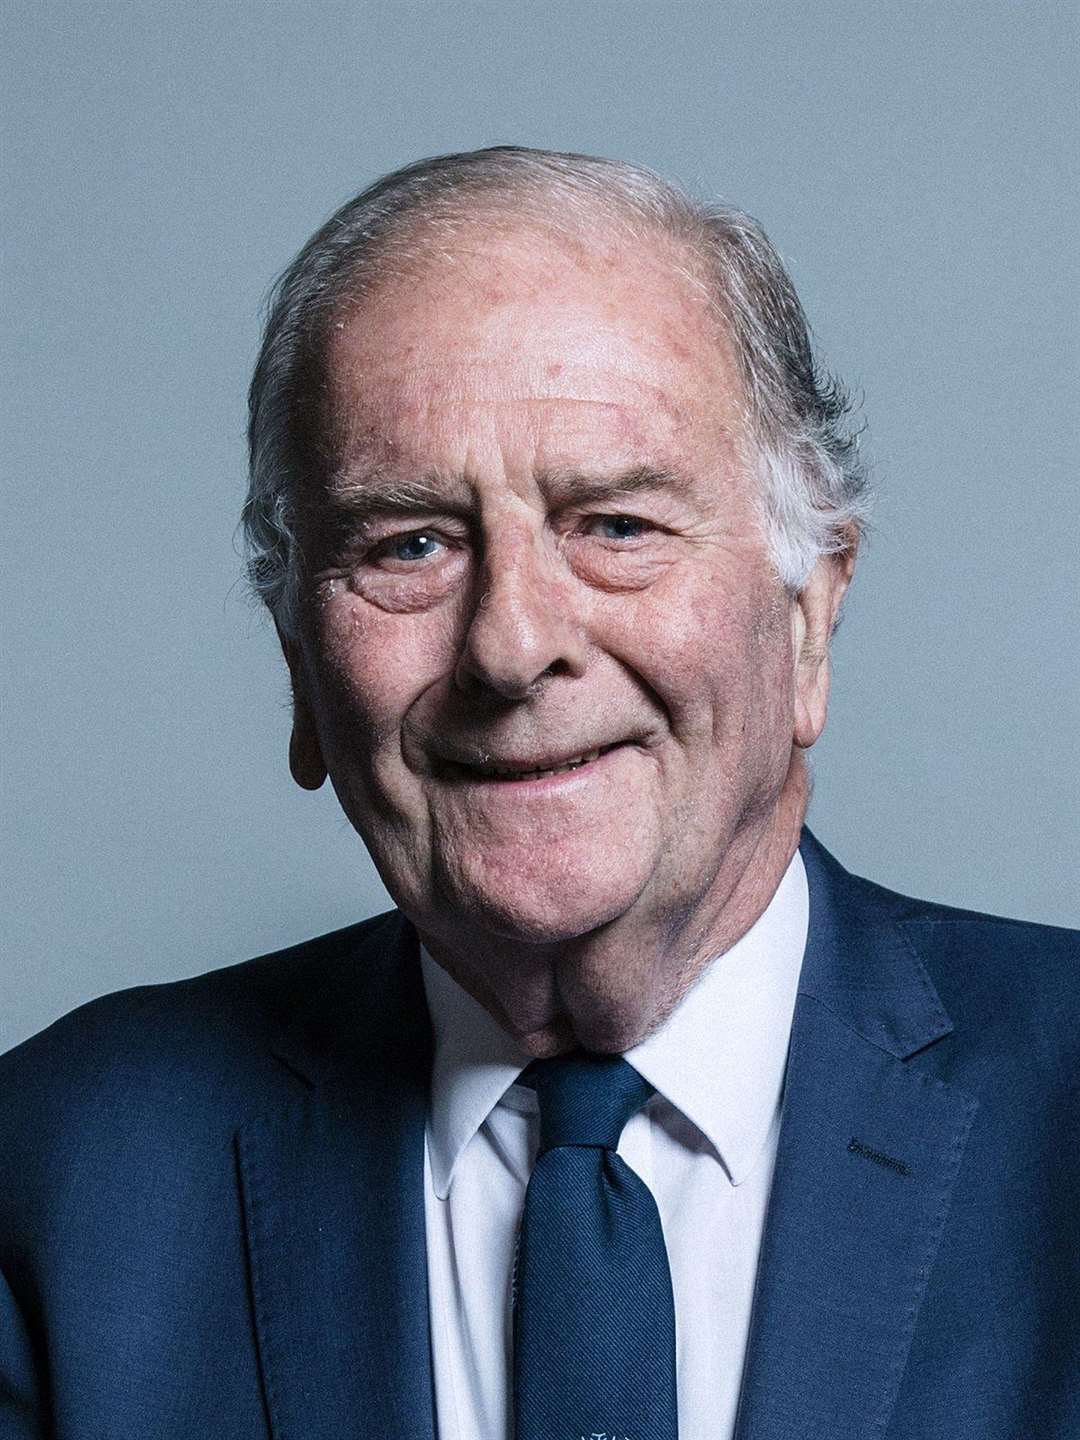 Sir Roger Gale was the first Kent MP to speak out